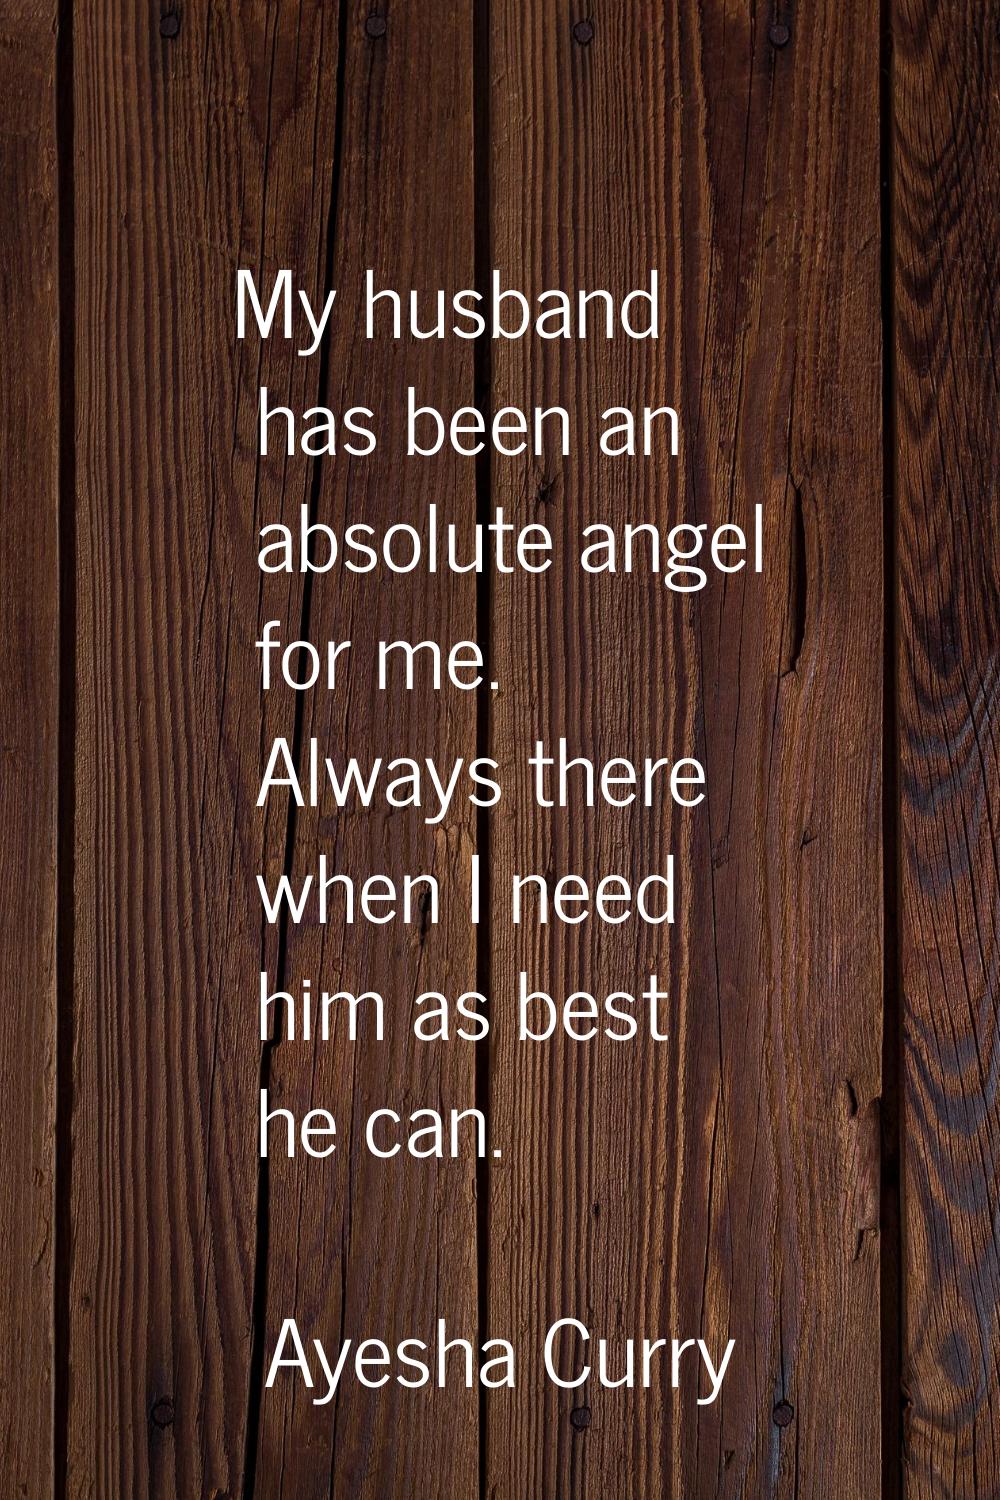 My husband has been an absolute angel for me. Always there when I need him as best he can.